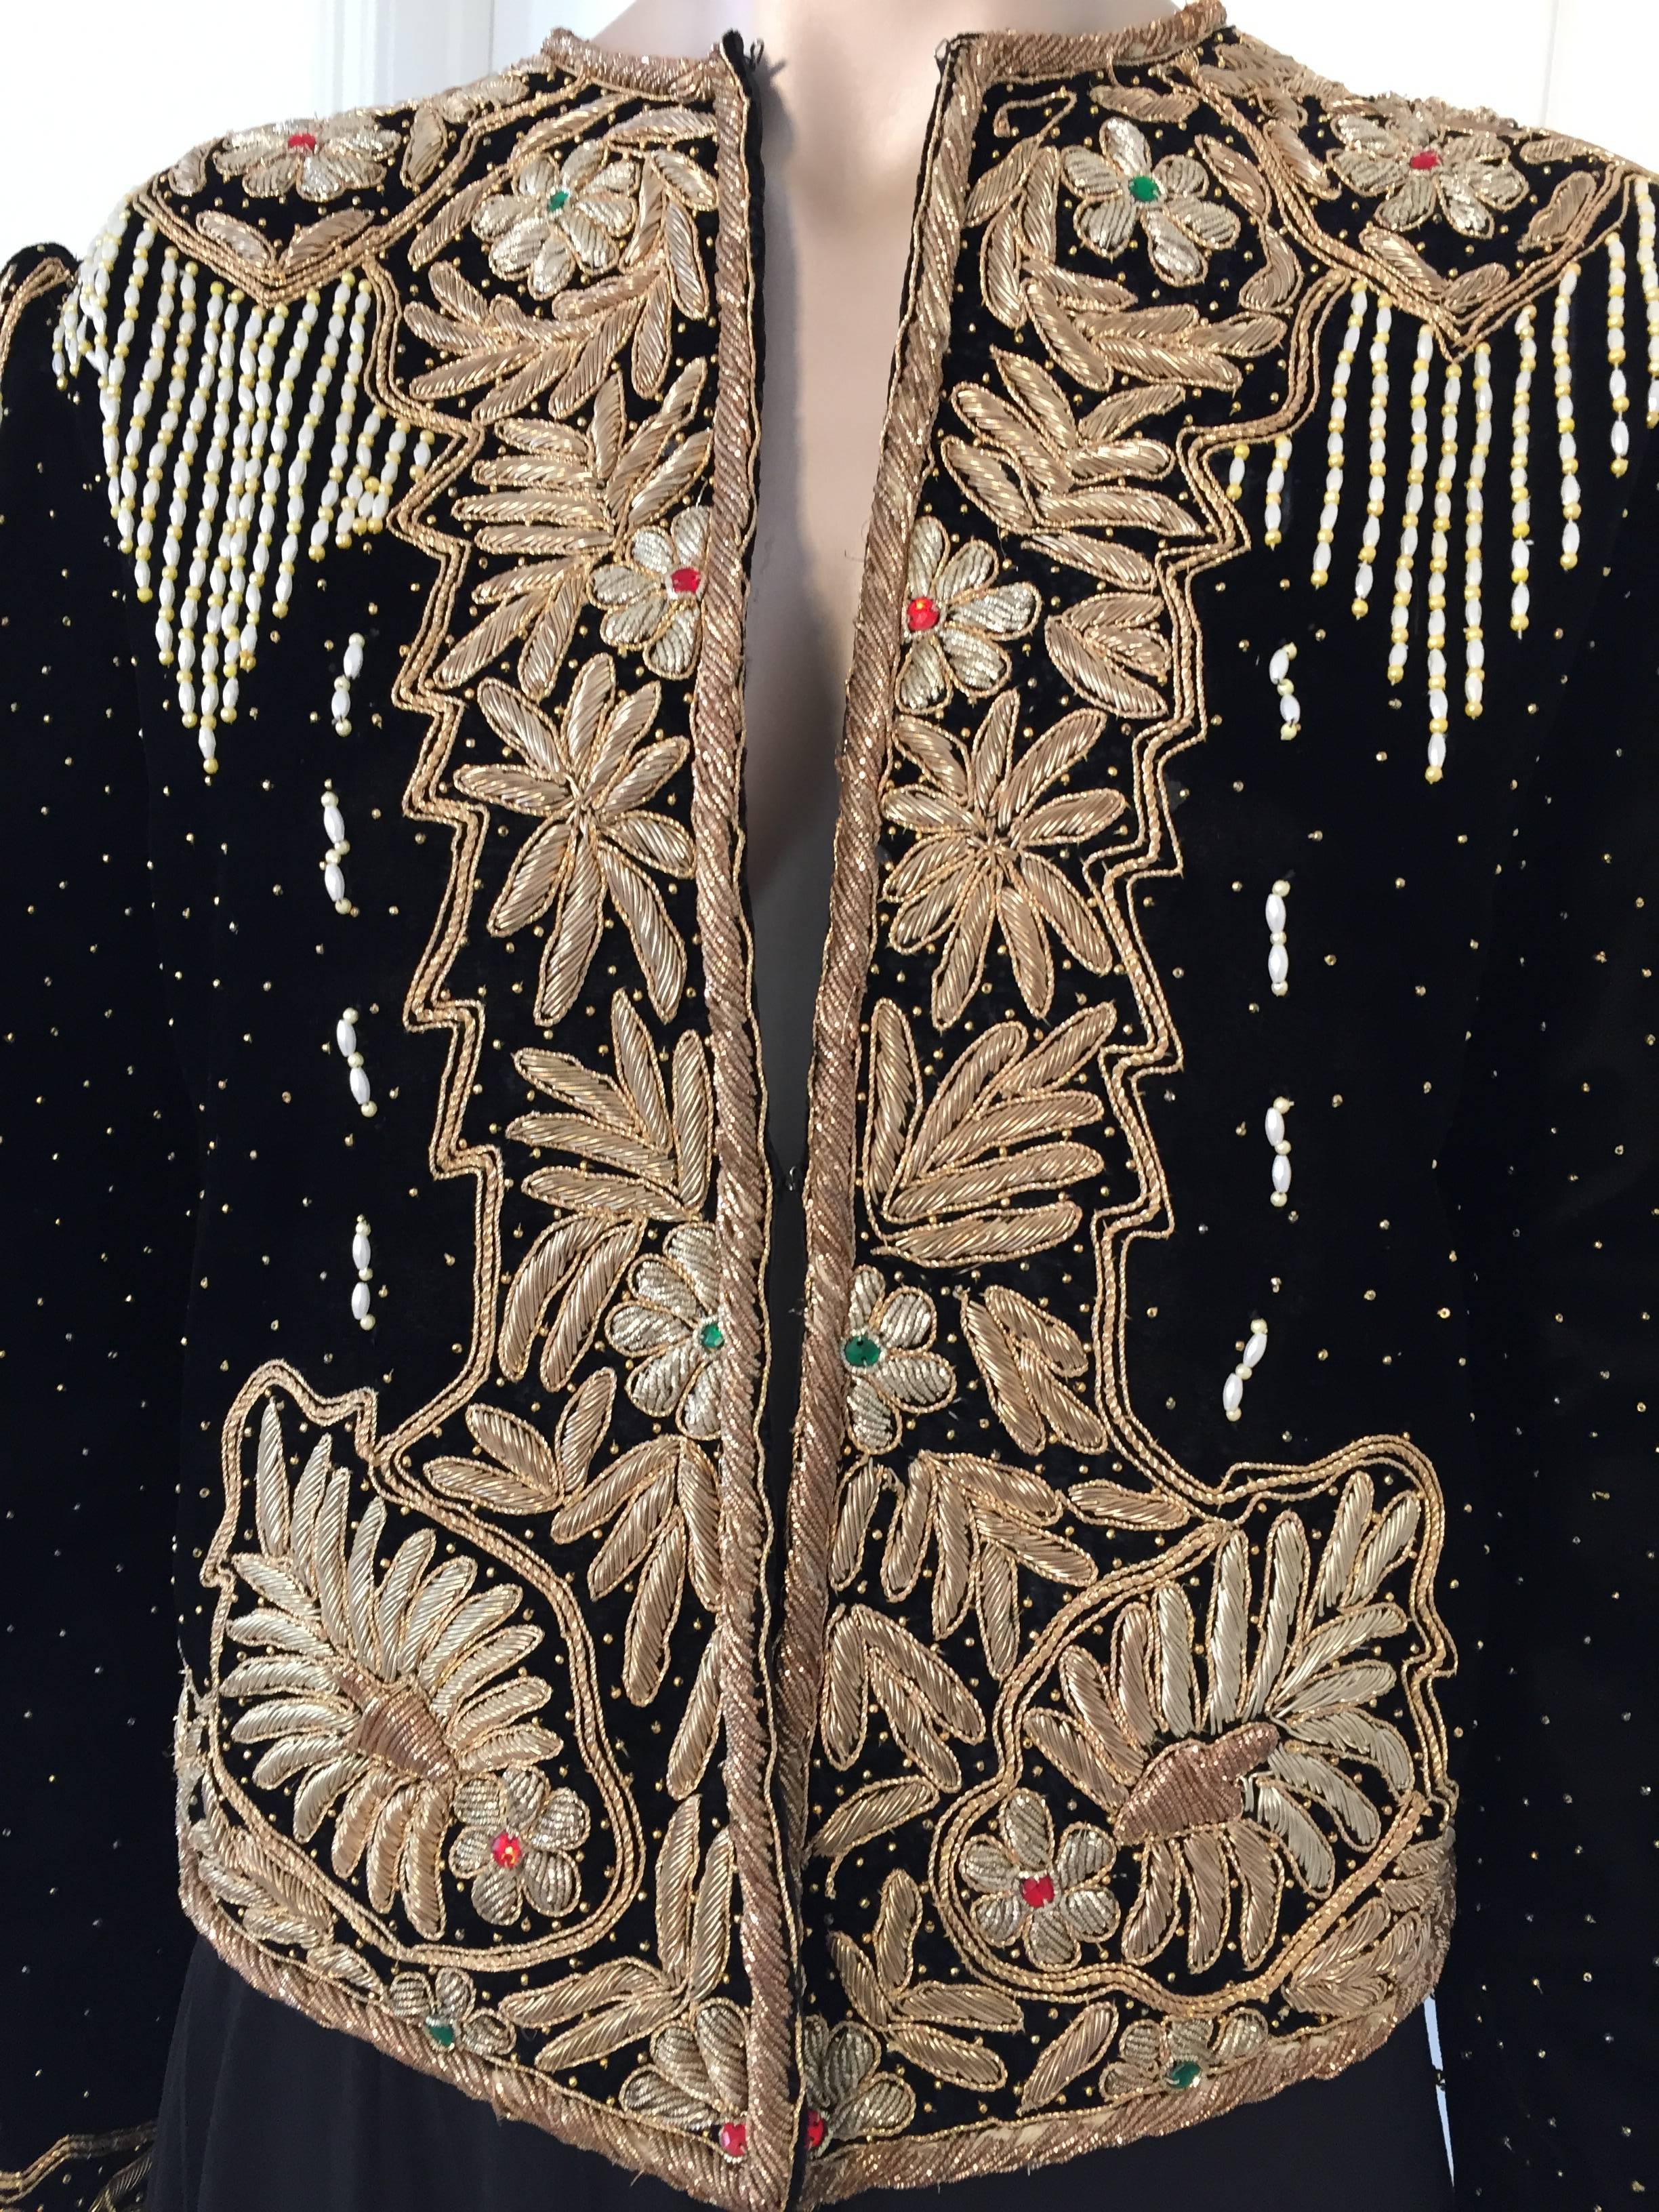 Magnificent 1980s vintage embroidered silk velvet evening two pieces gown, vest and skirt
The stunning beaded and sequined evening custom made black silk velvet blazer is detailed with gold of micro seed glass beads, gold tone round beads, gold lame